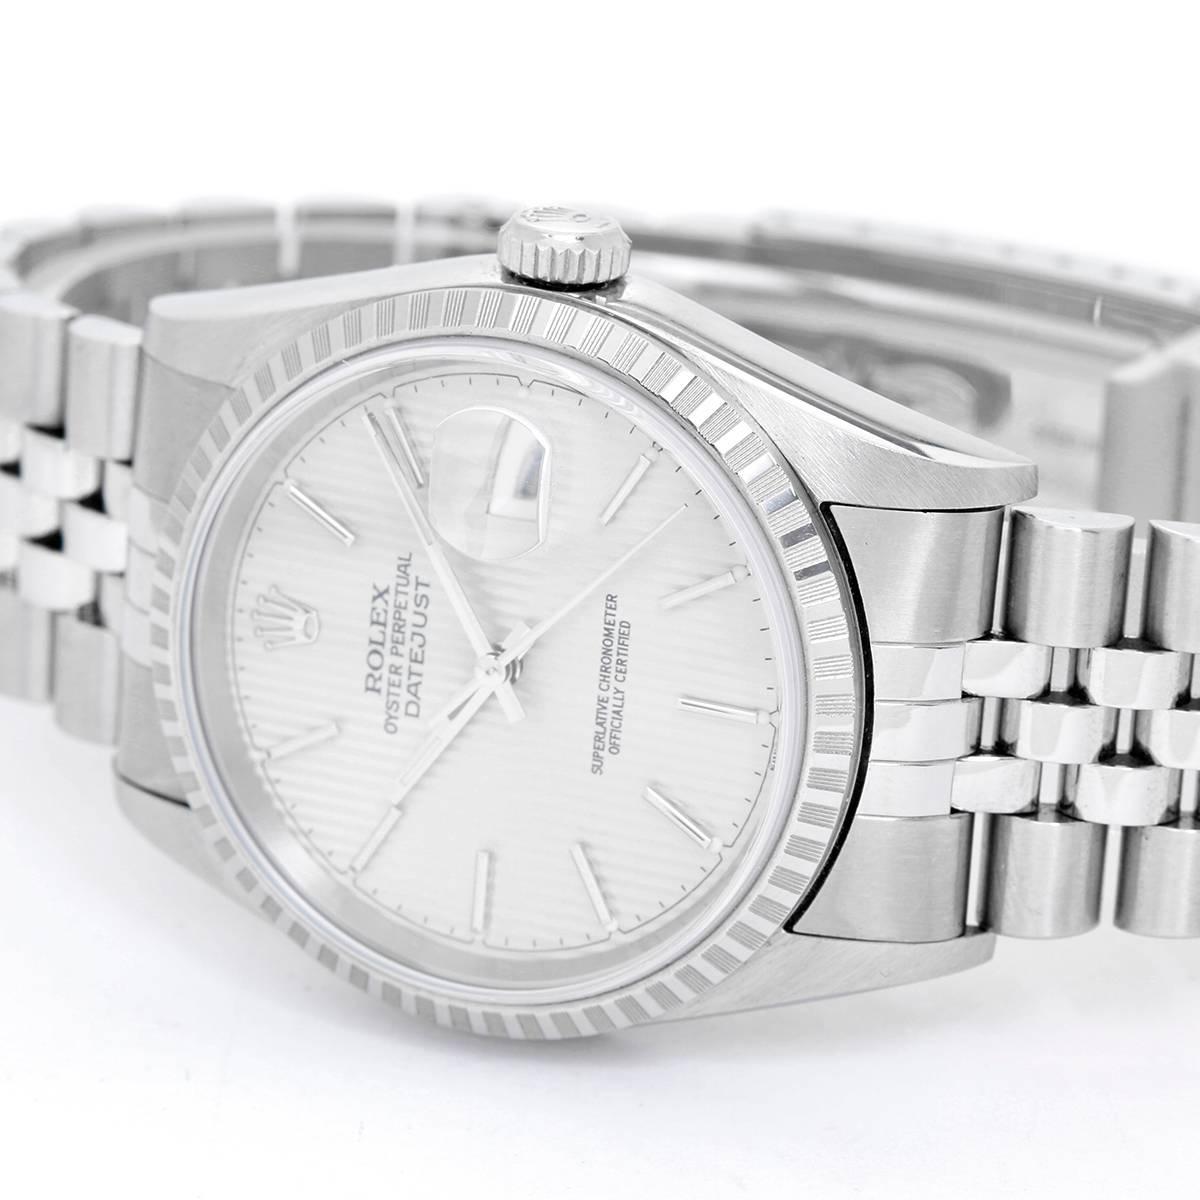 Rolex Datejust Men's Stainless Steel Watch 16220 -  Automatic winding, 31 jewels, Quickset, sapphire crystal. Stainless steel case with engine turned bezel (36mm diameter). Silver tapestry dial with stick markers. Stainless steel  Jubilee bracelet.